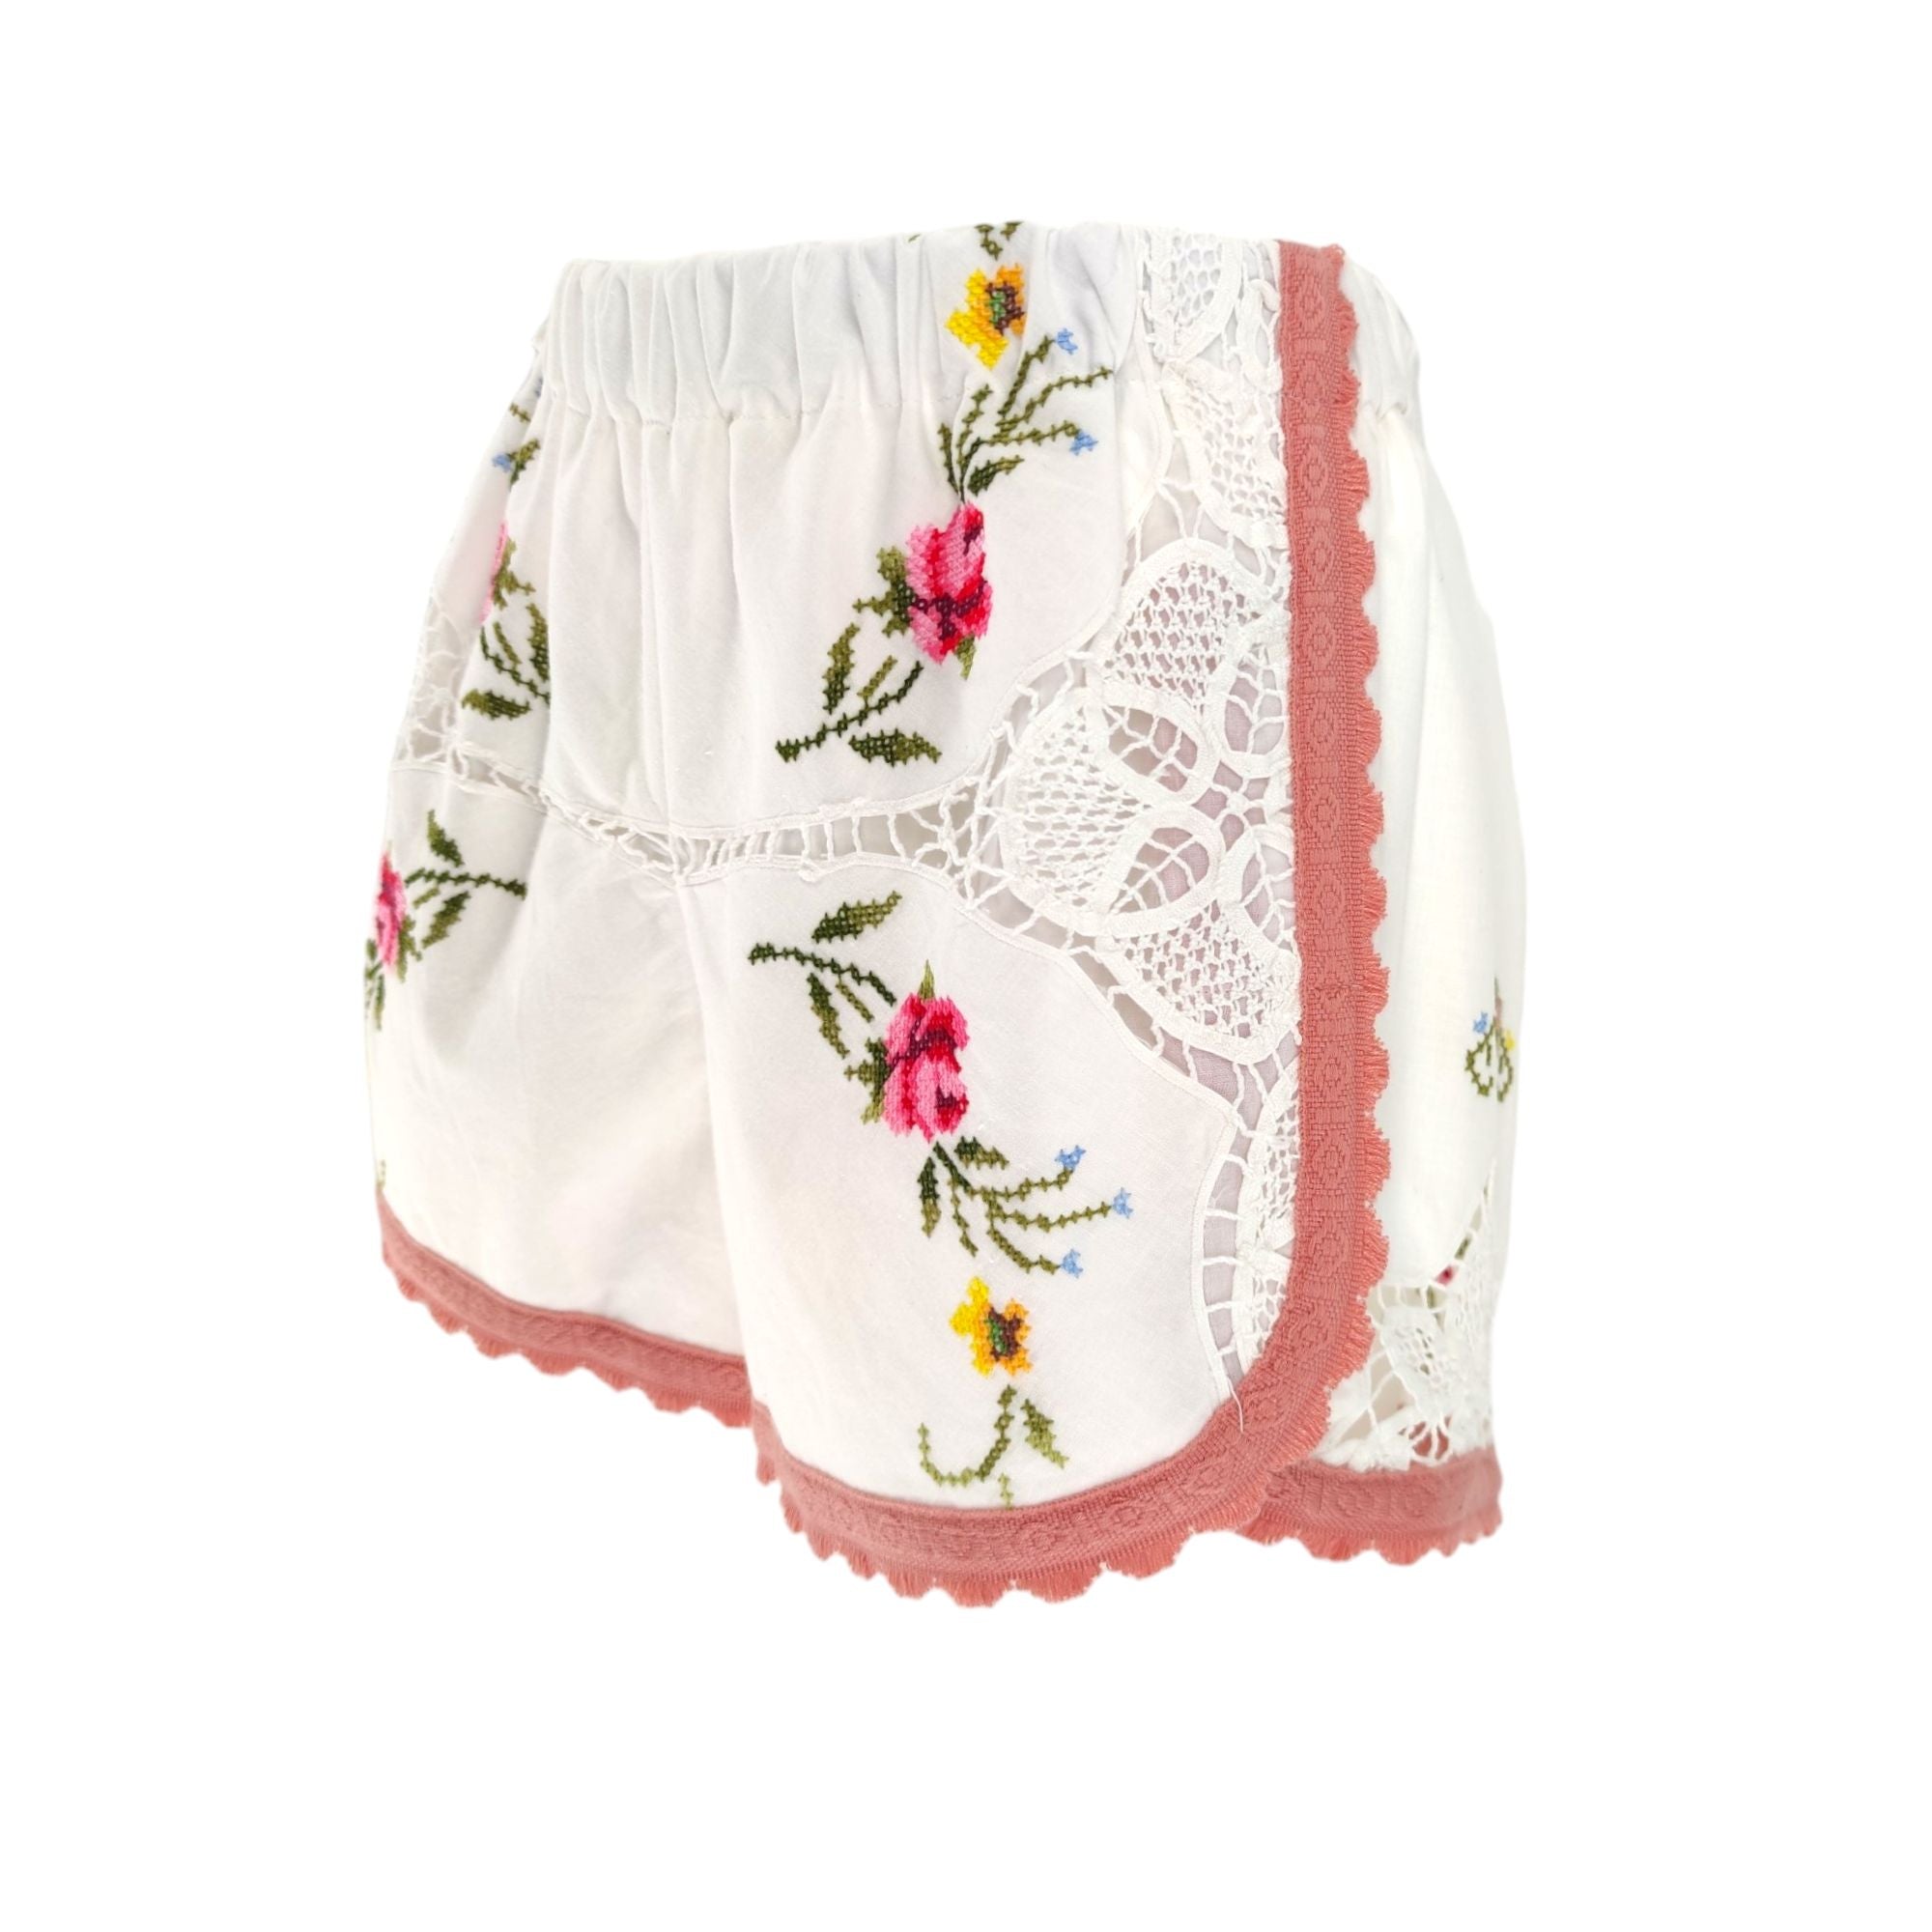 Women's Embroidery Shorts Off White/Pink 